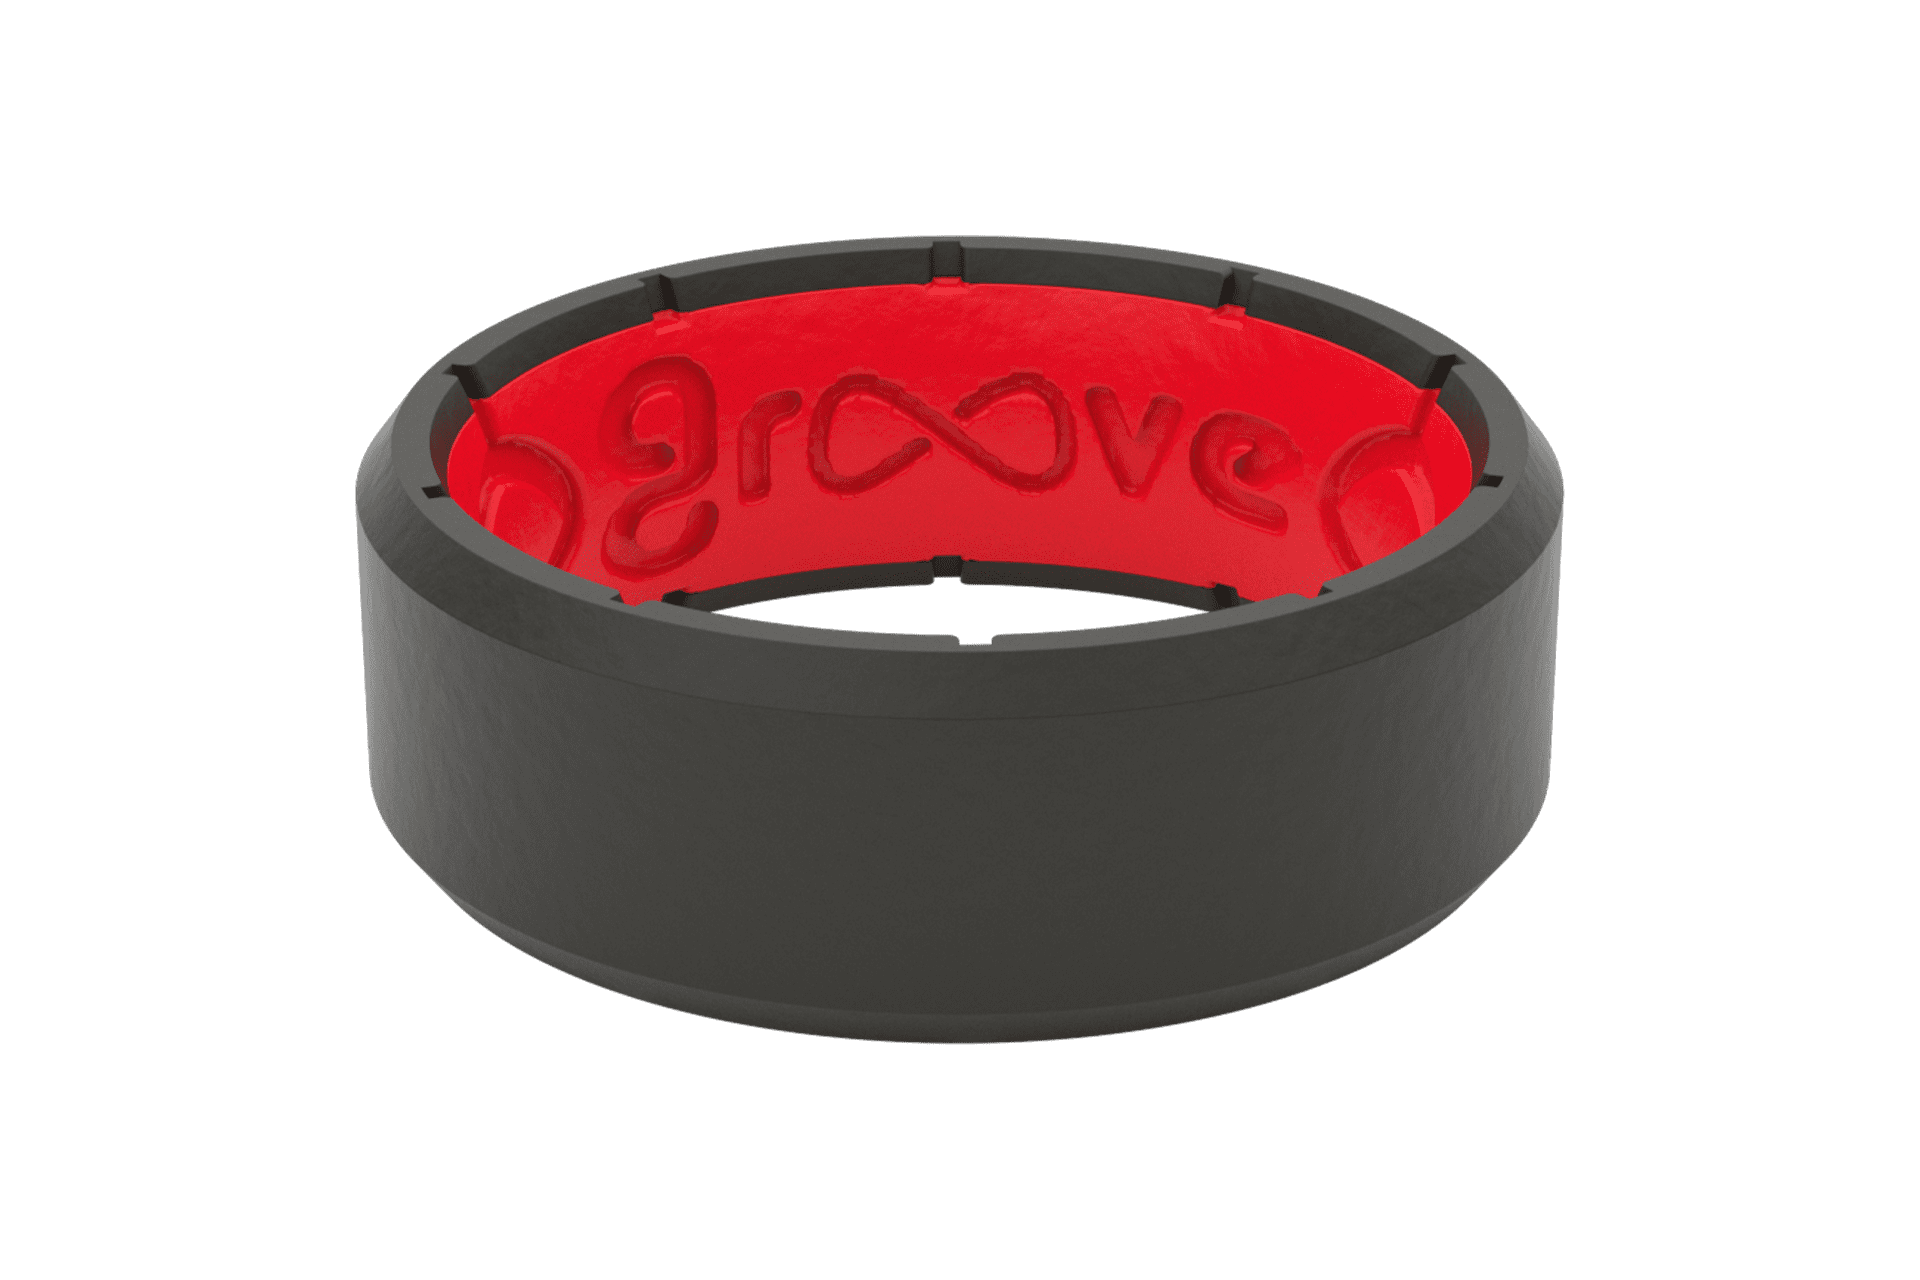 NEW Groove Men's Ring EDGE Black silicone wedding band 8 9 10 11 12 13 